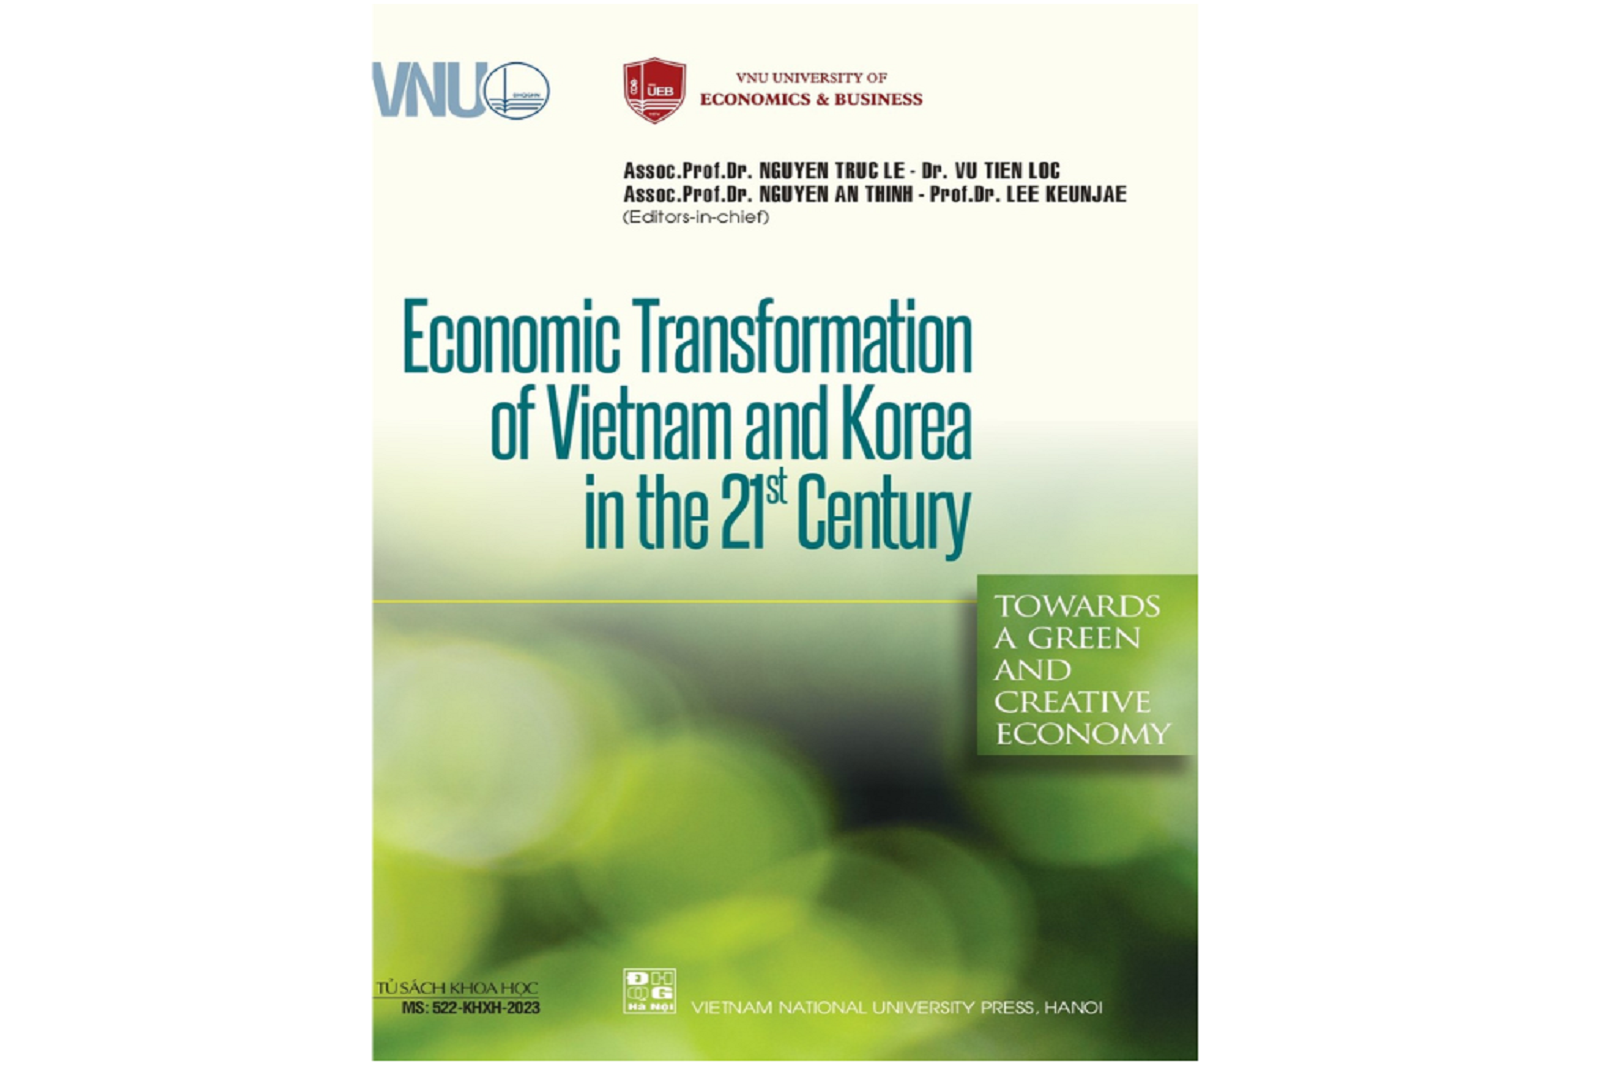 Economic Transformation of Vietnam and Korea in the 21st Century towards a Green and Creative Economy